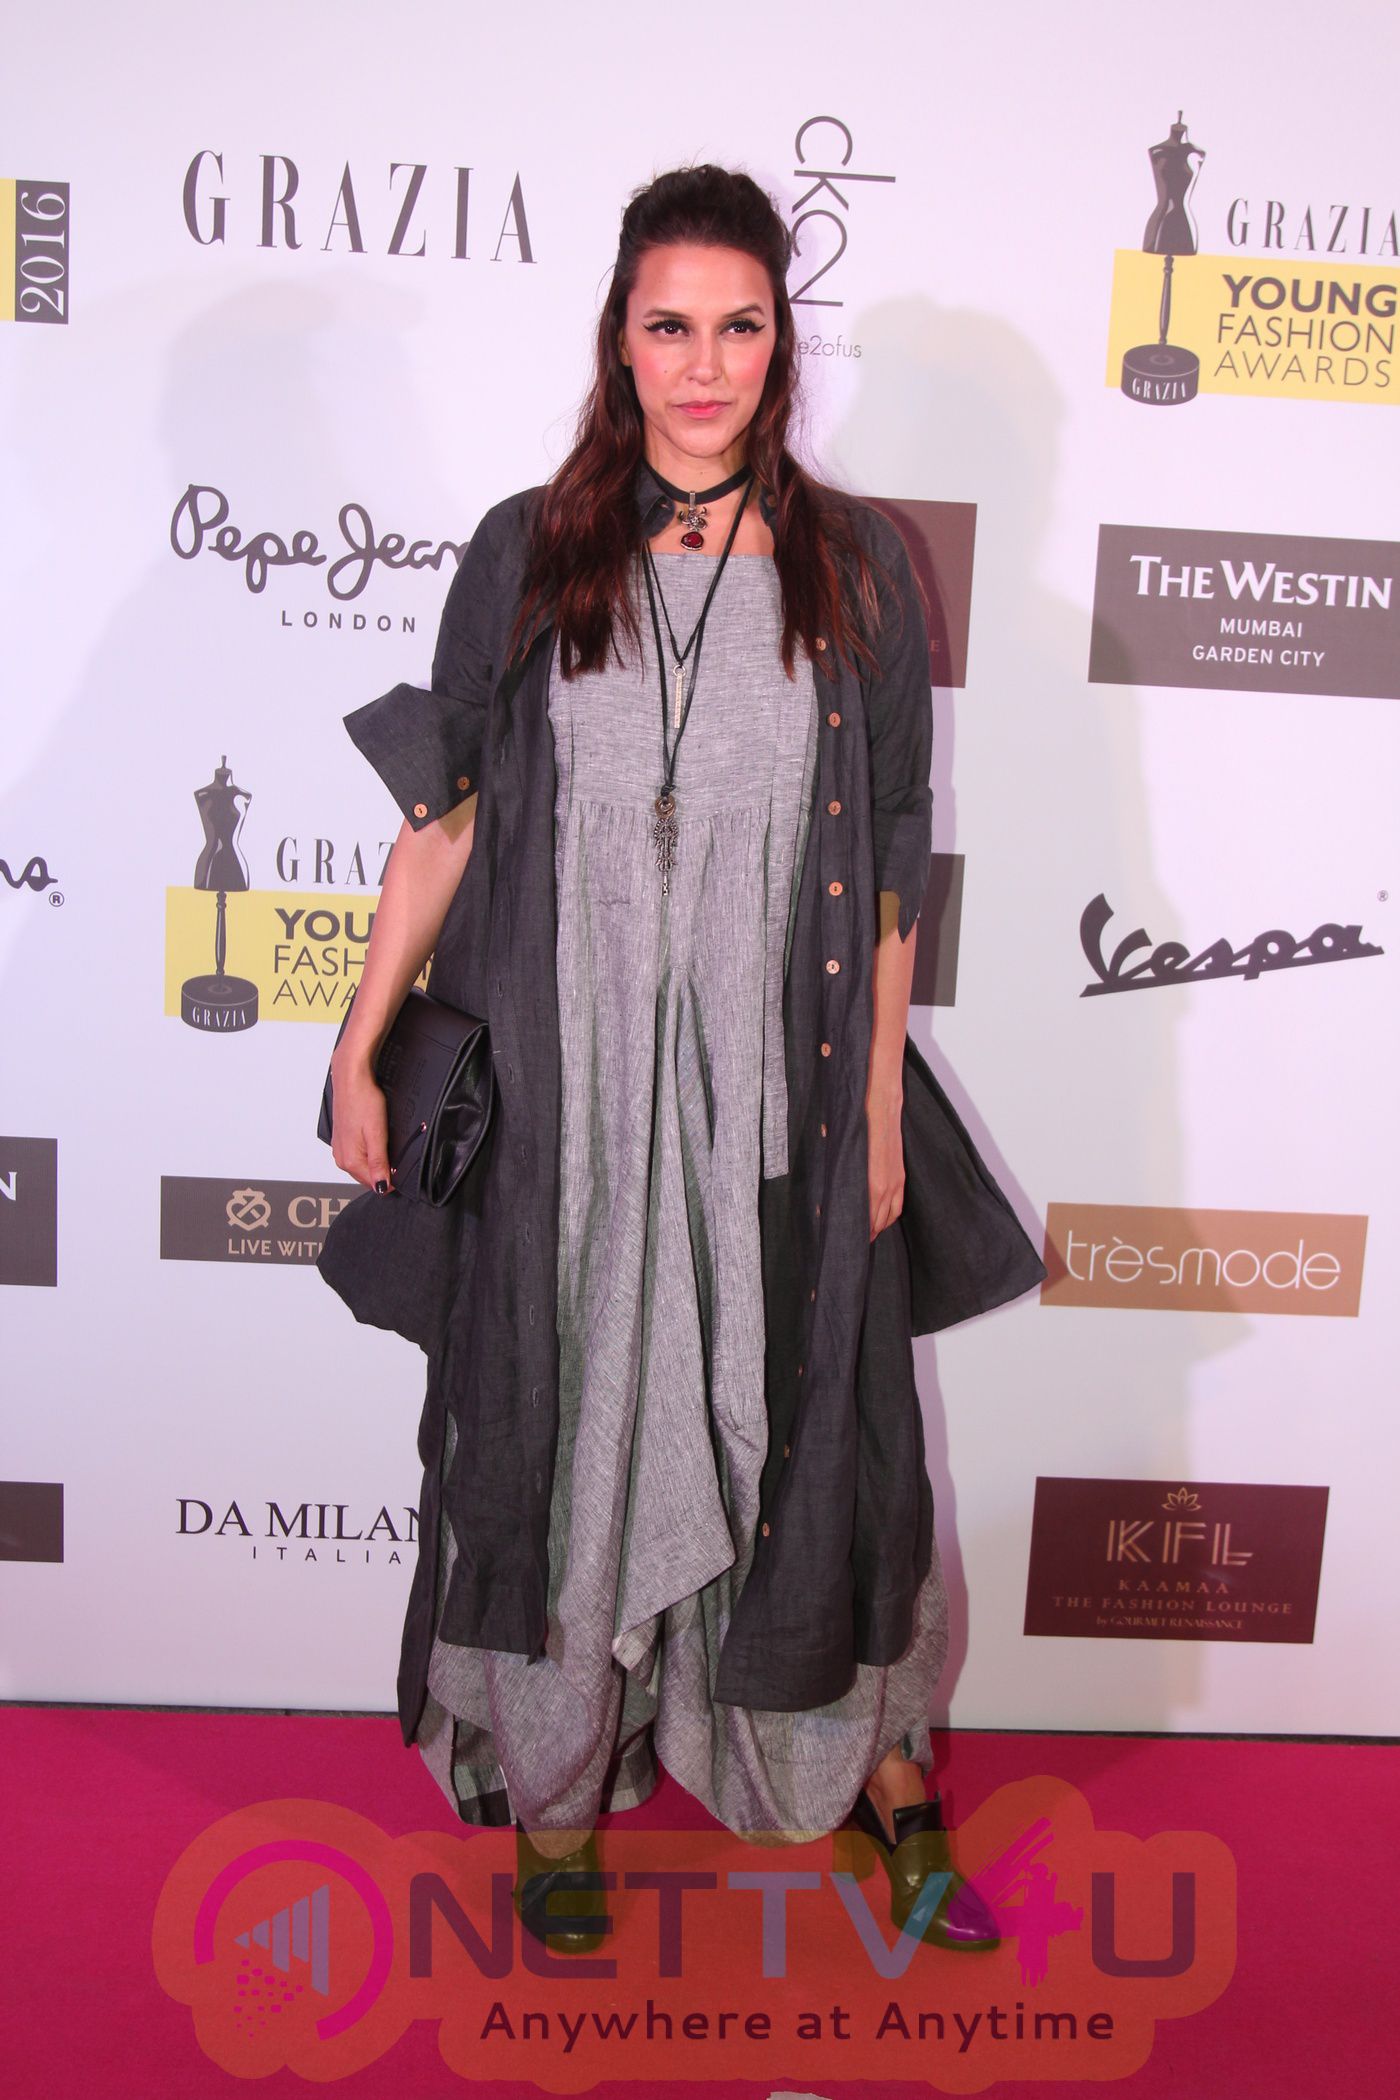 Photos Of Celebrities At The Red Carpet Of 6Th Edition Of The Grazia Young Fashion Awards Held At Westin Mumbai Hindi Ga